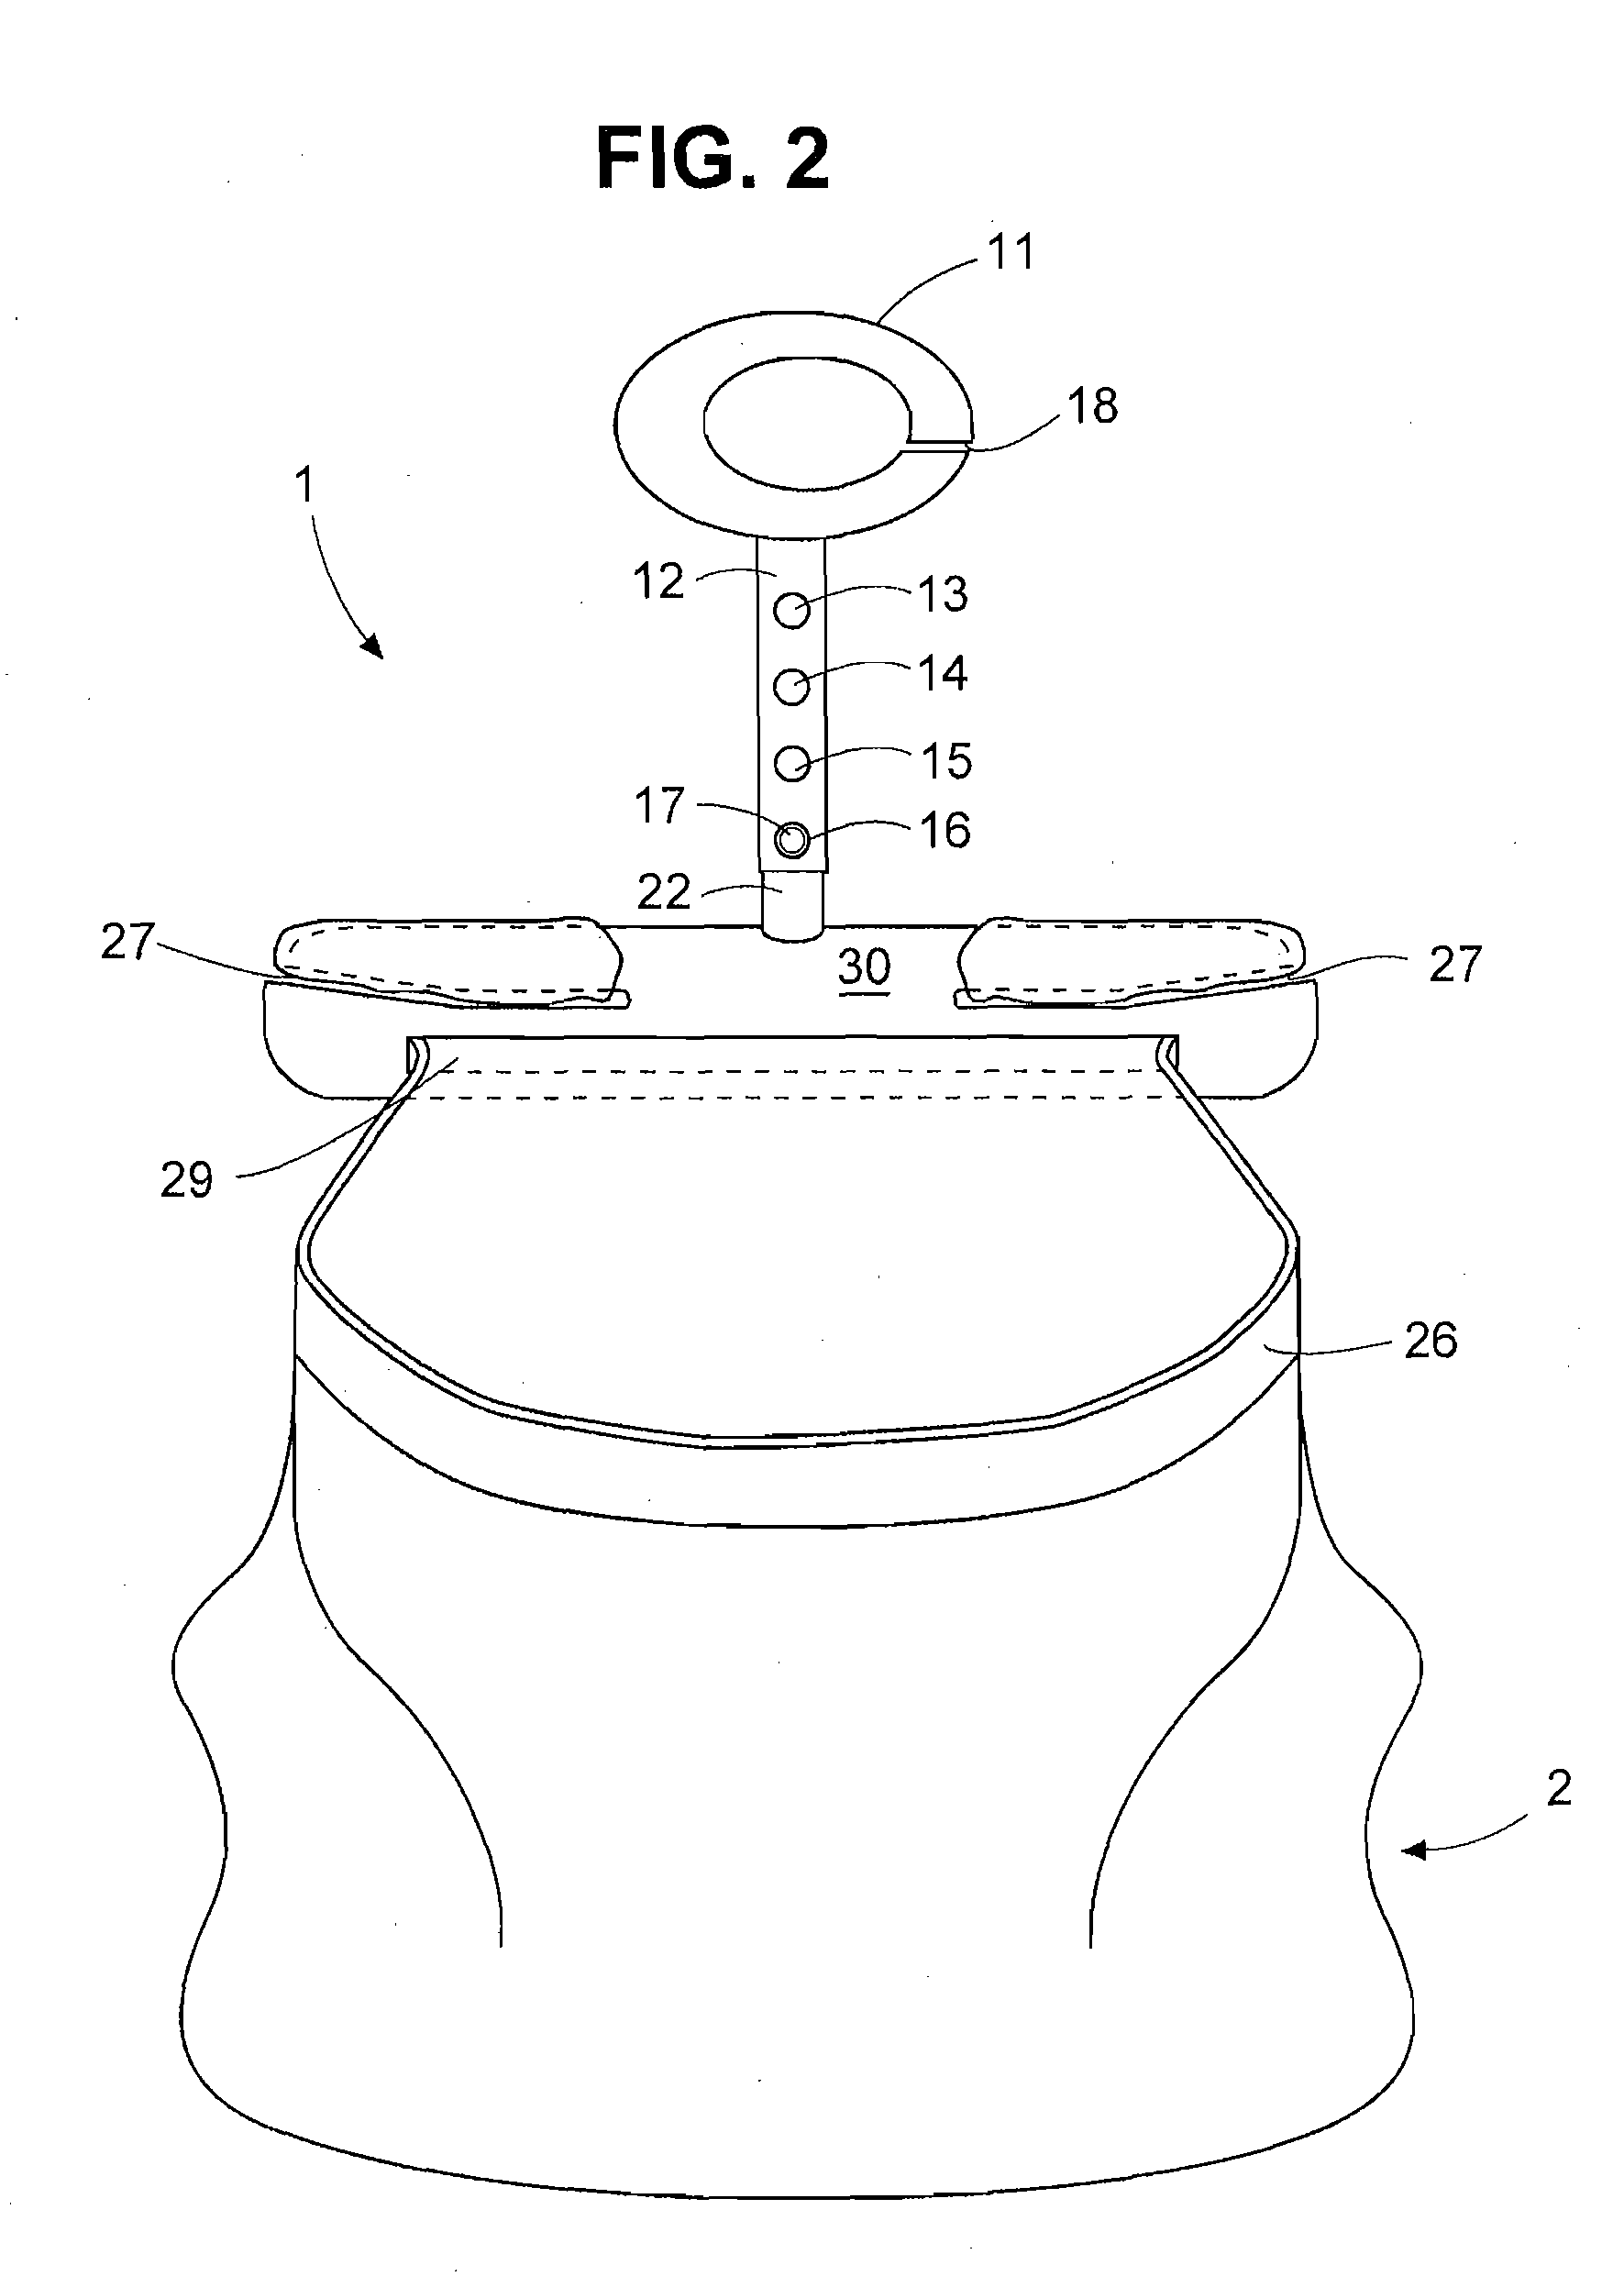 Portable bag holding device